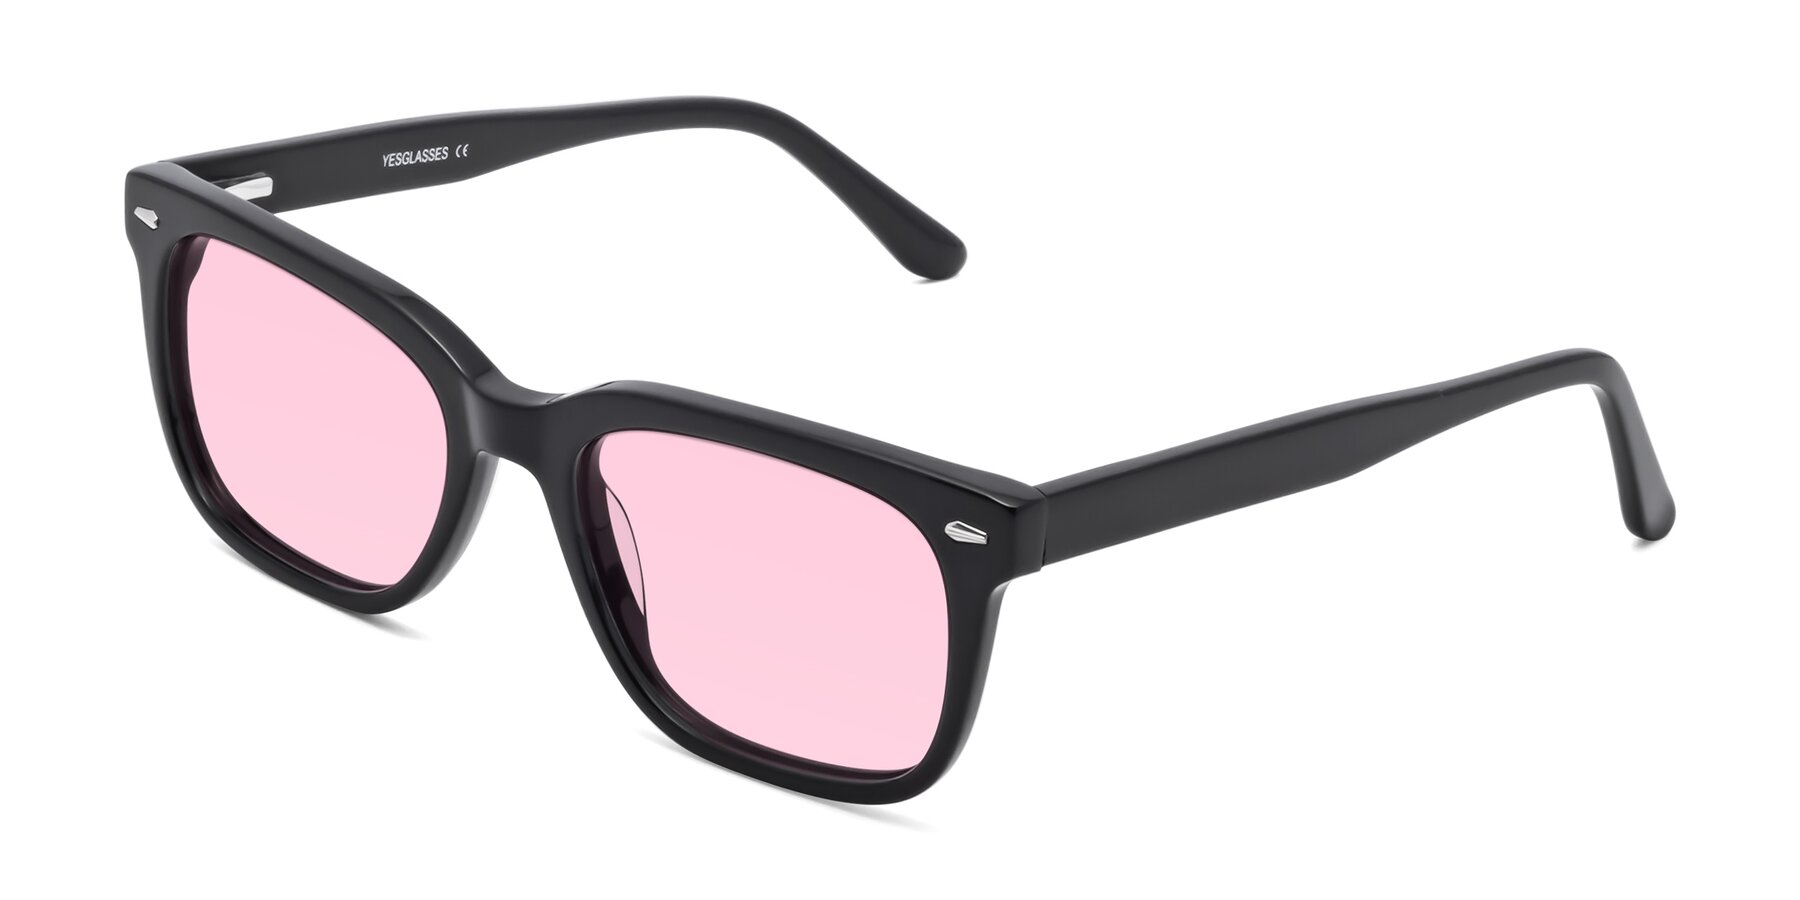 Angle of 1052 in Black with Light Pink Tinted Lenses